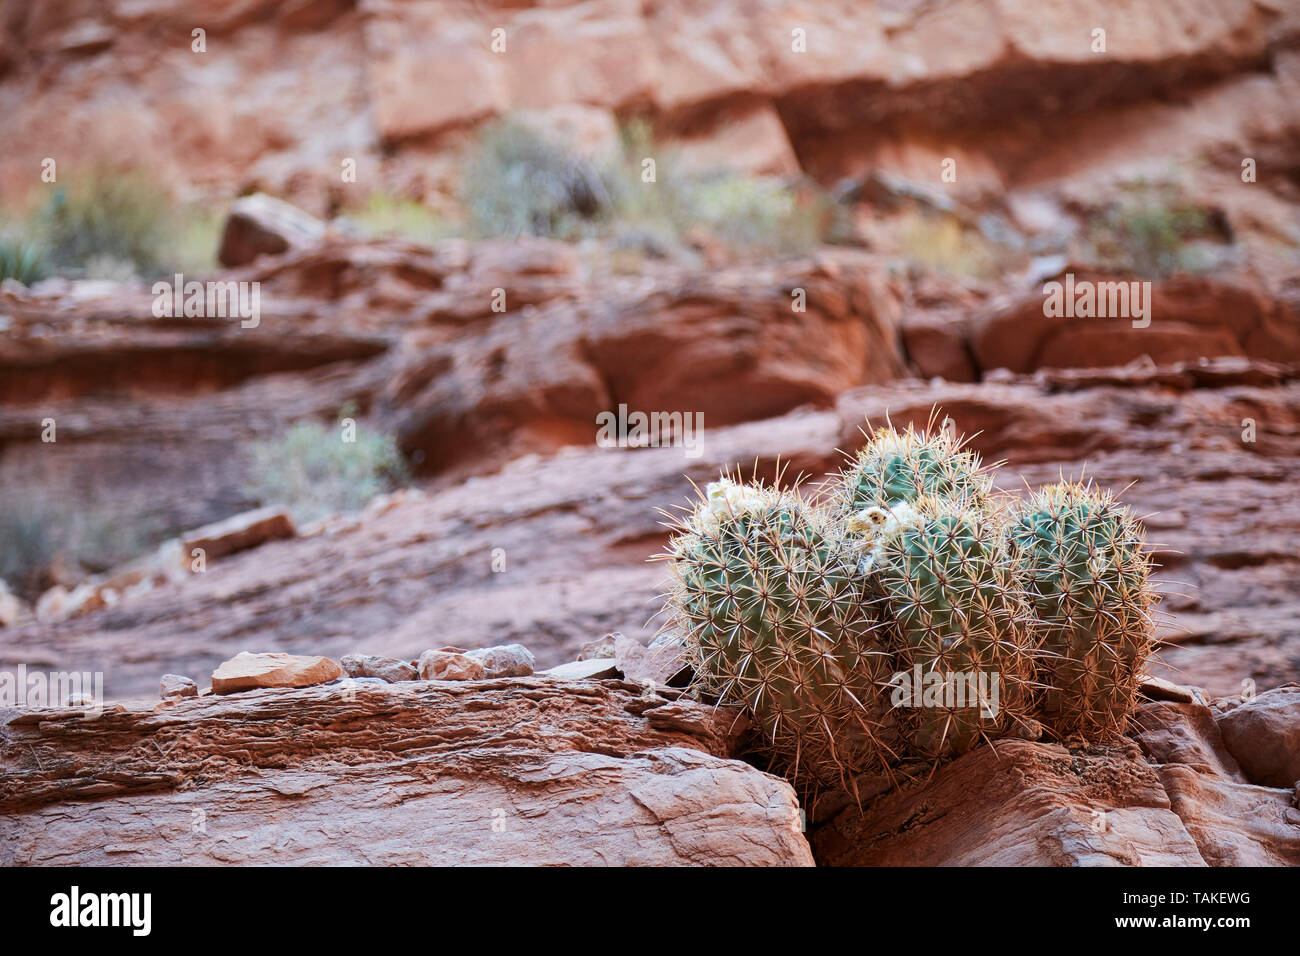 Small cactus grows from red rocks in Arizona desert. Stock Photo